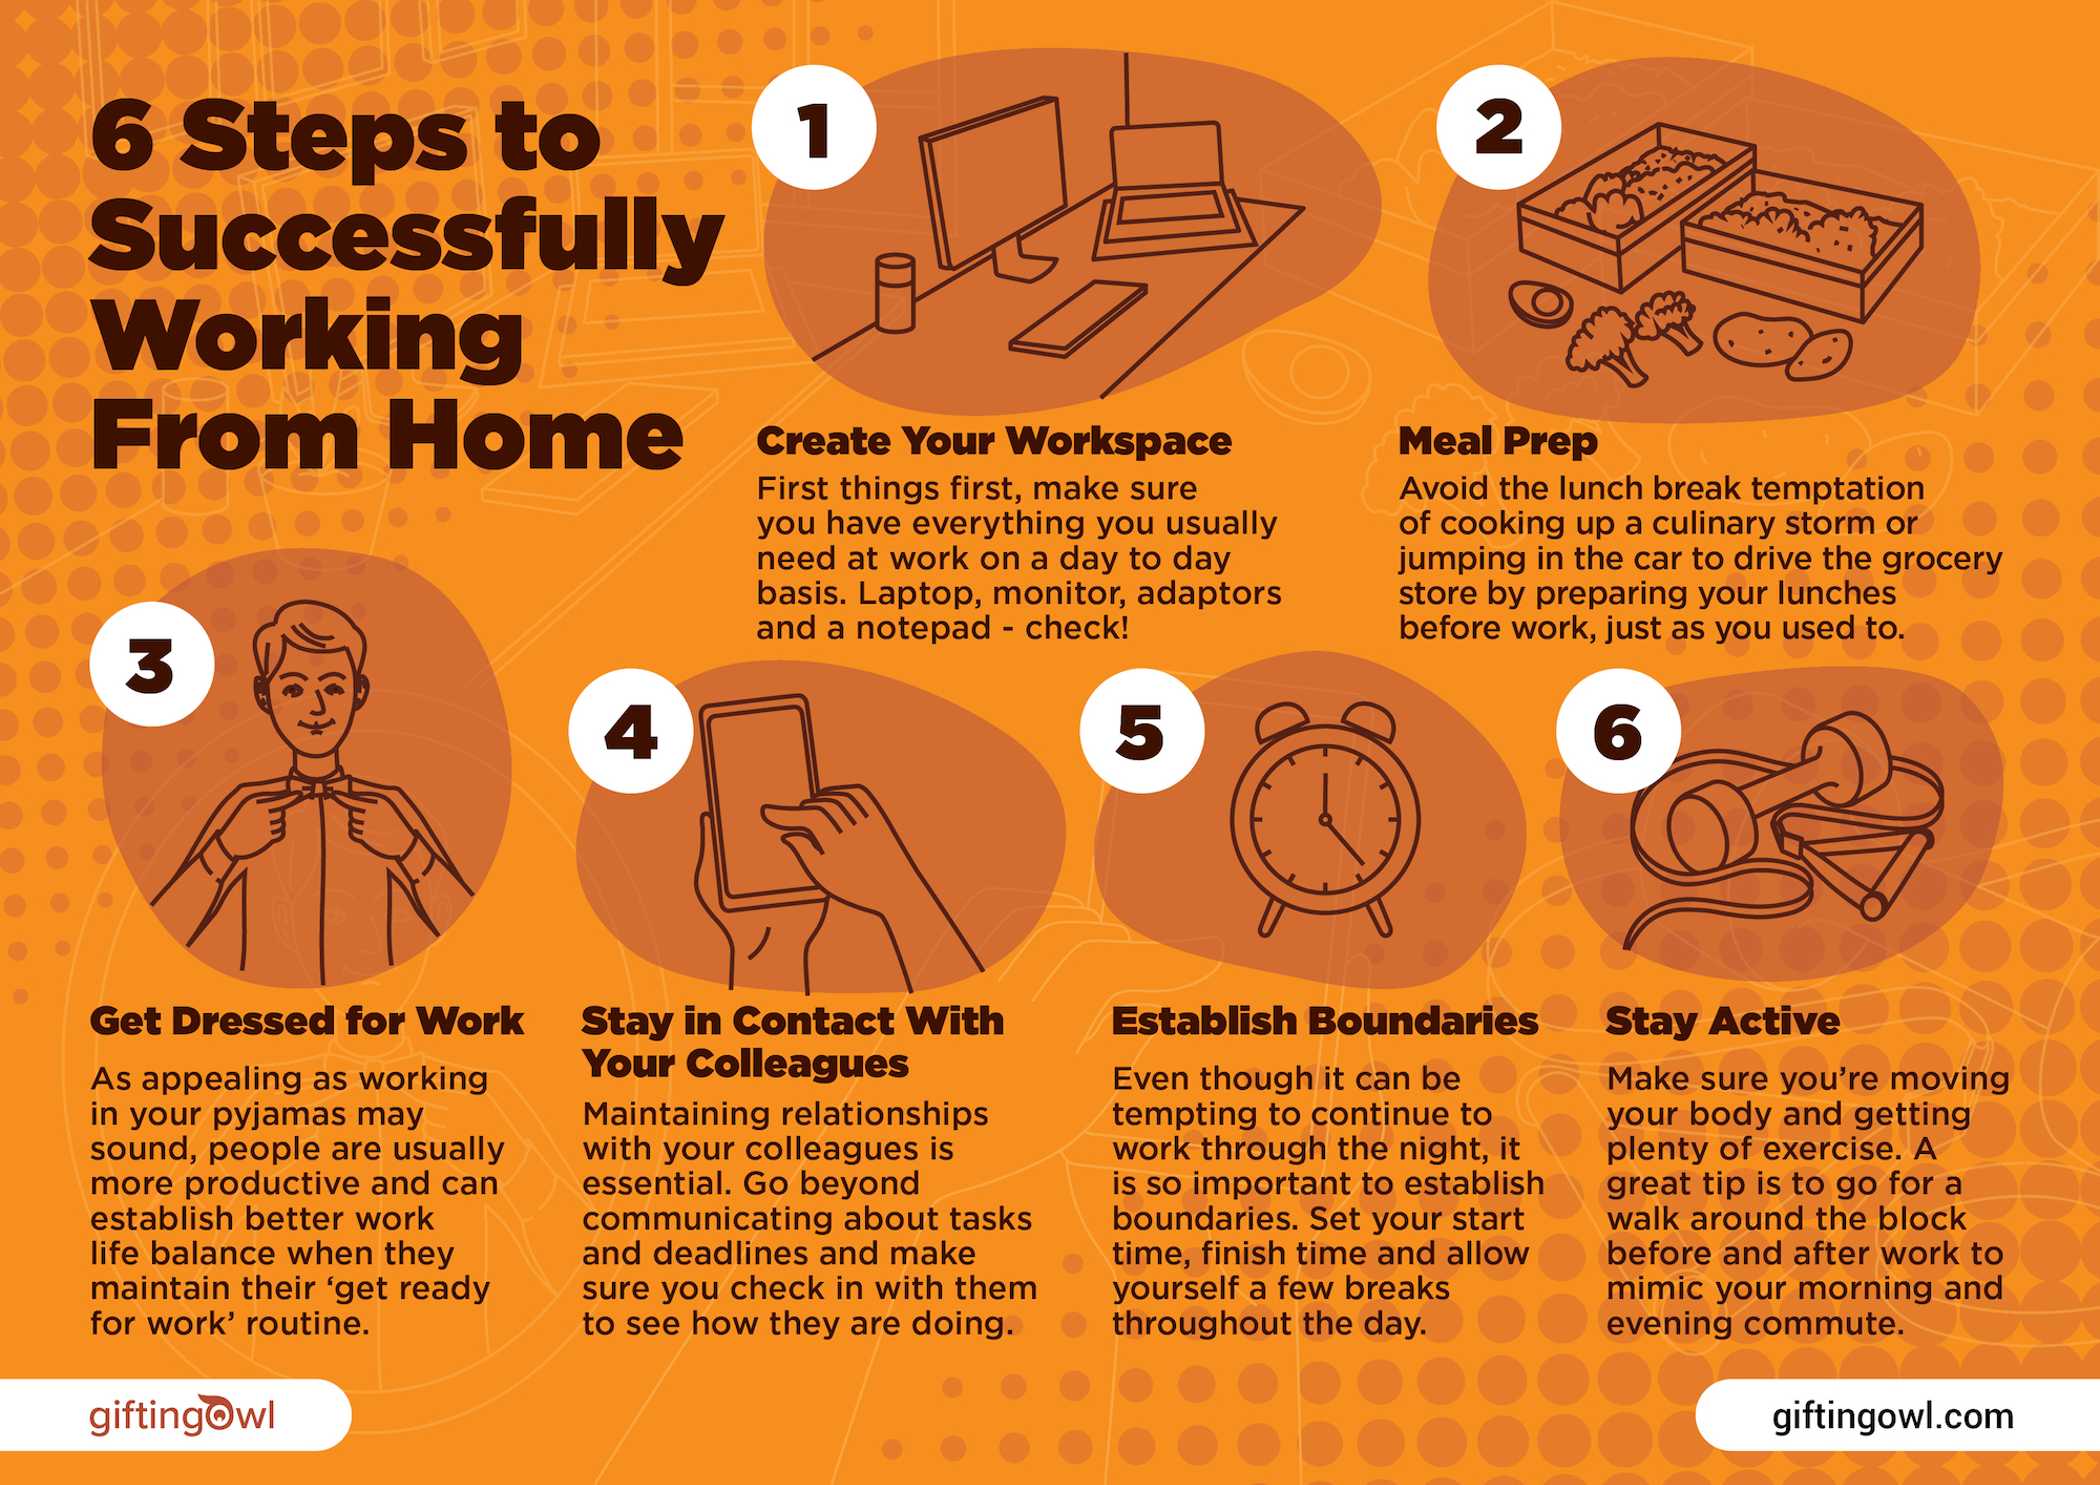 How to Successfully Work From Home